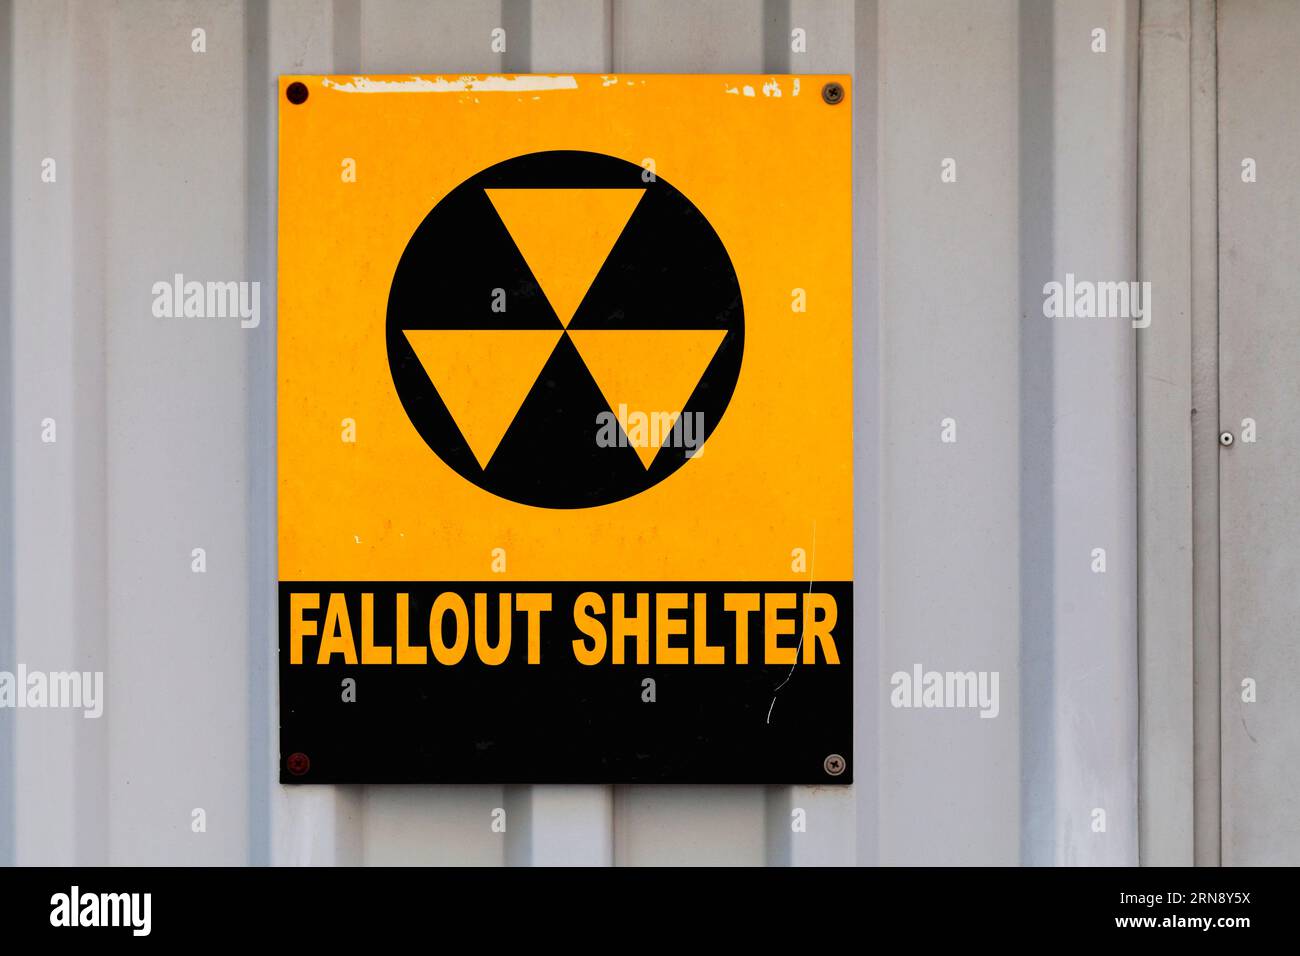 Black nuclear symbol drawn on a yellow placard with written in 'Fallout shelter'. Stock Photo